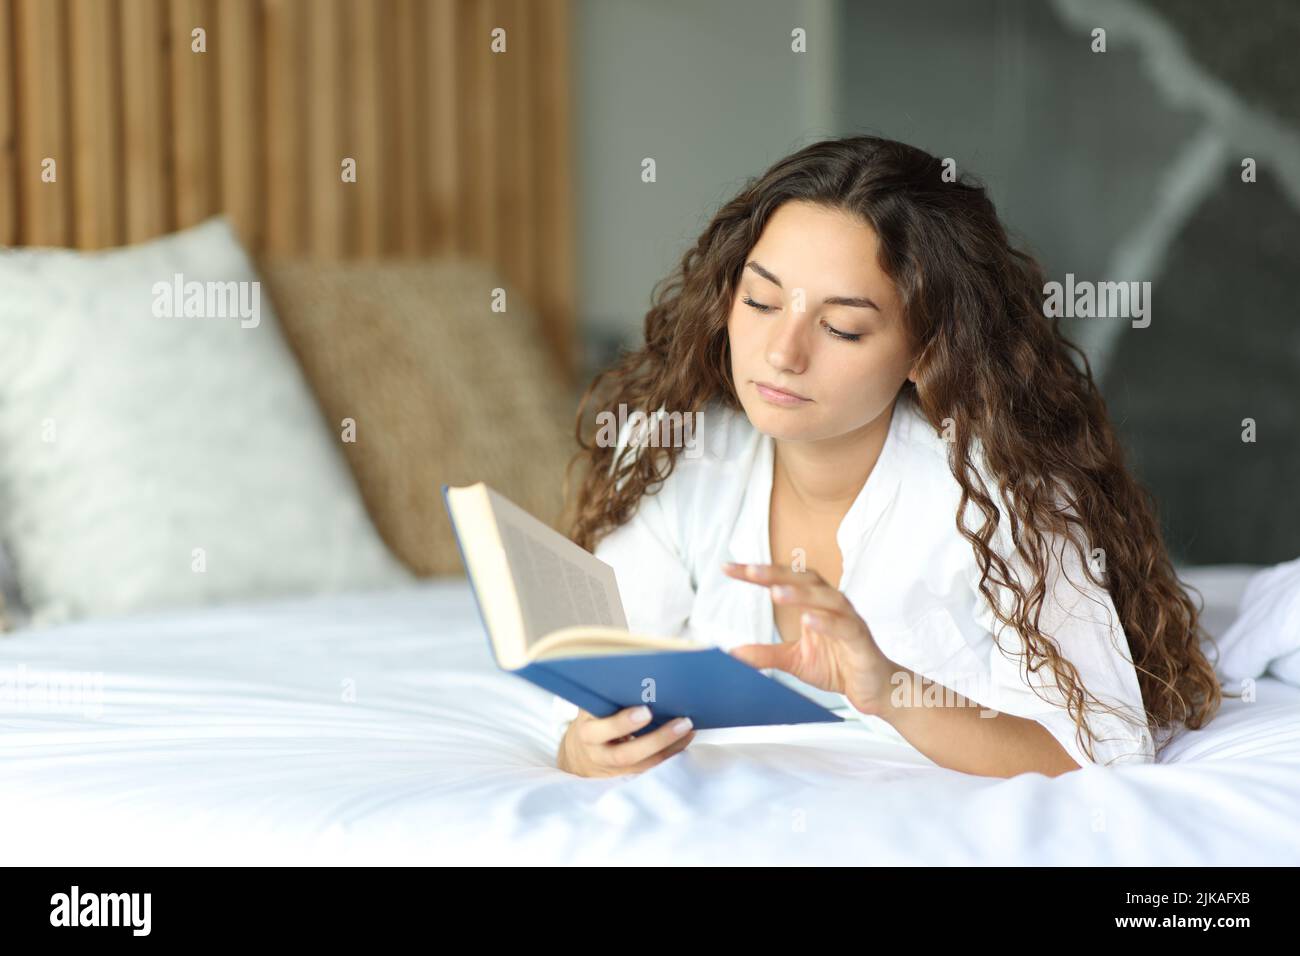 Concentrated woman on a hotel bed reading a paper book Stock Photo